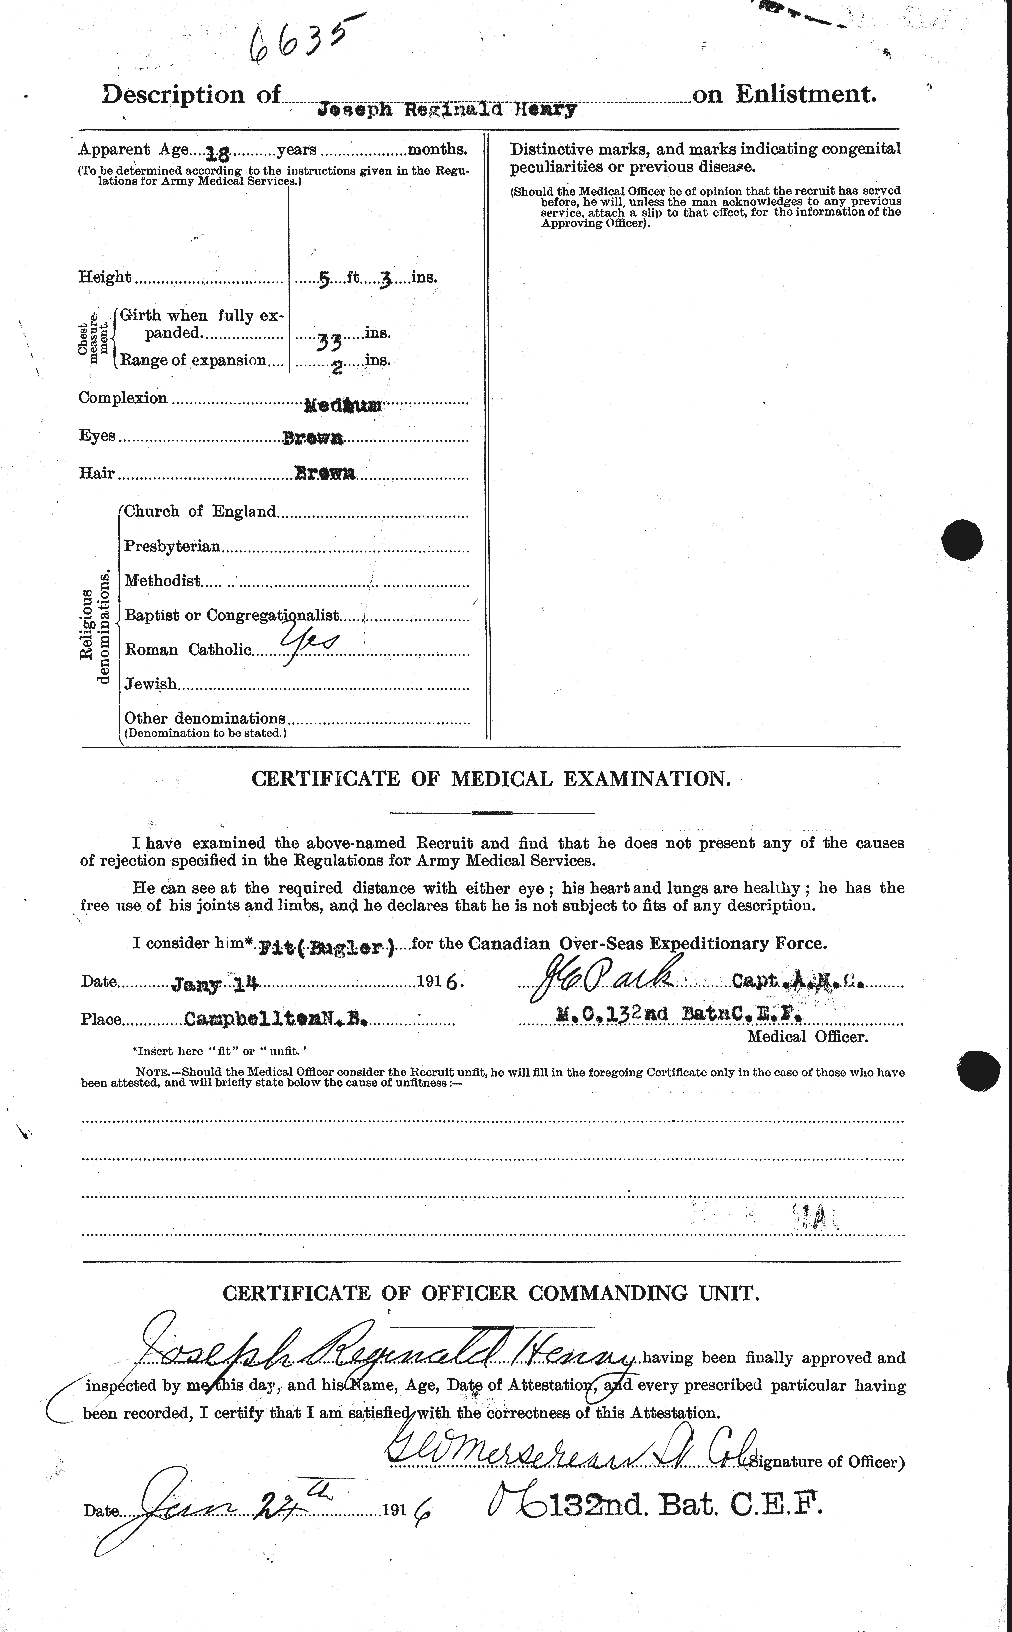 Personnel Records of the First World War - CEF 387649b